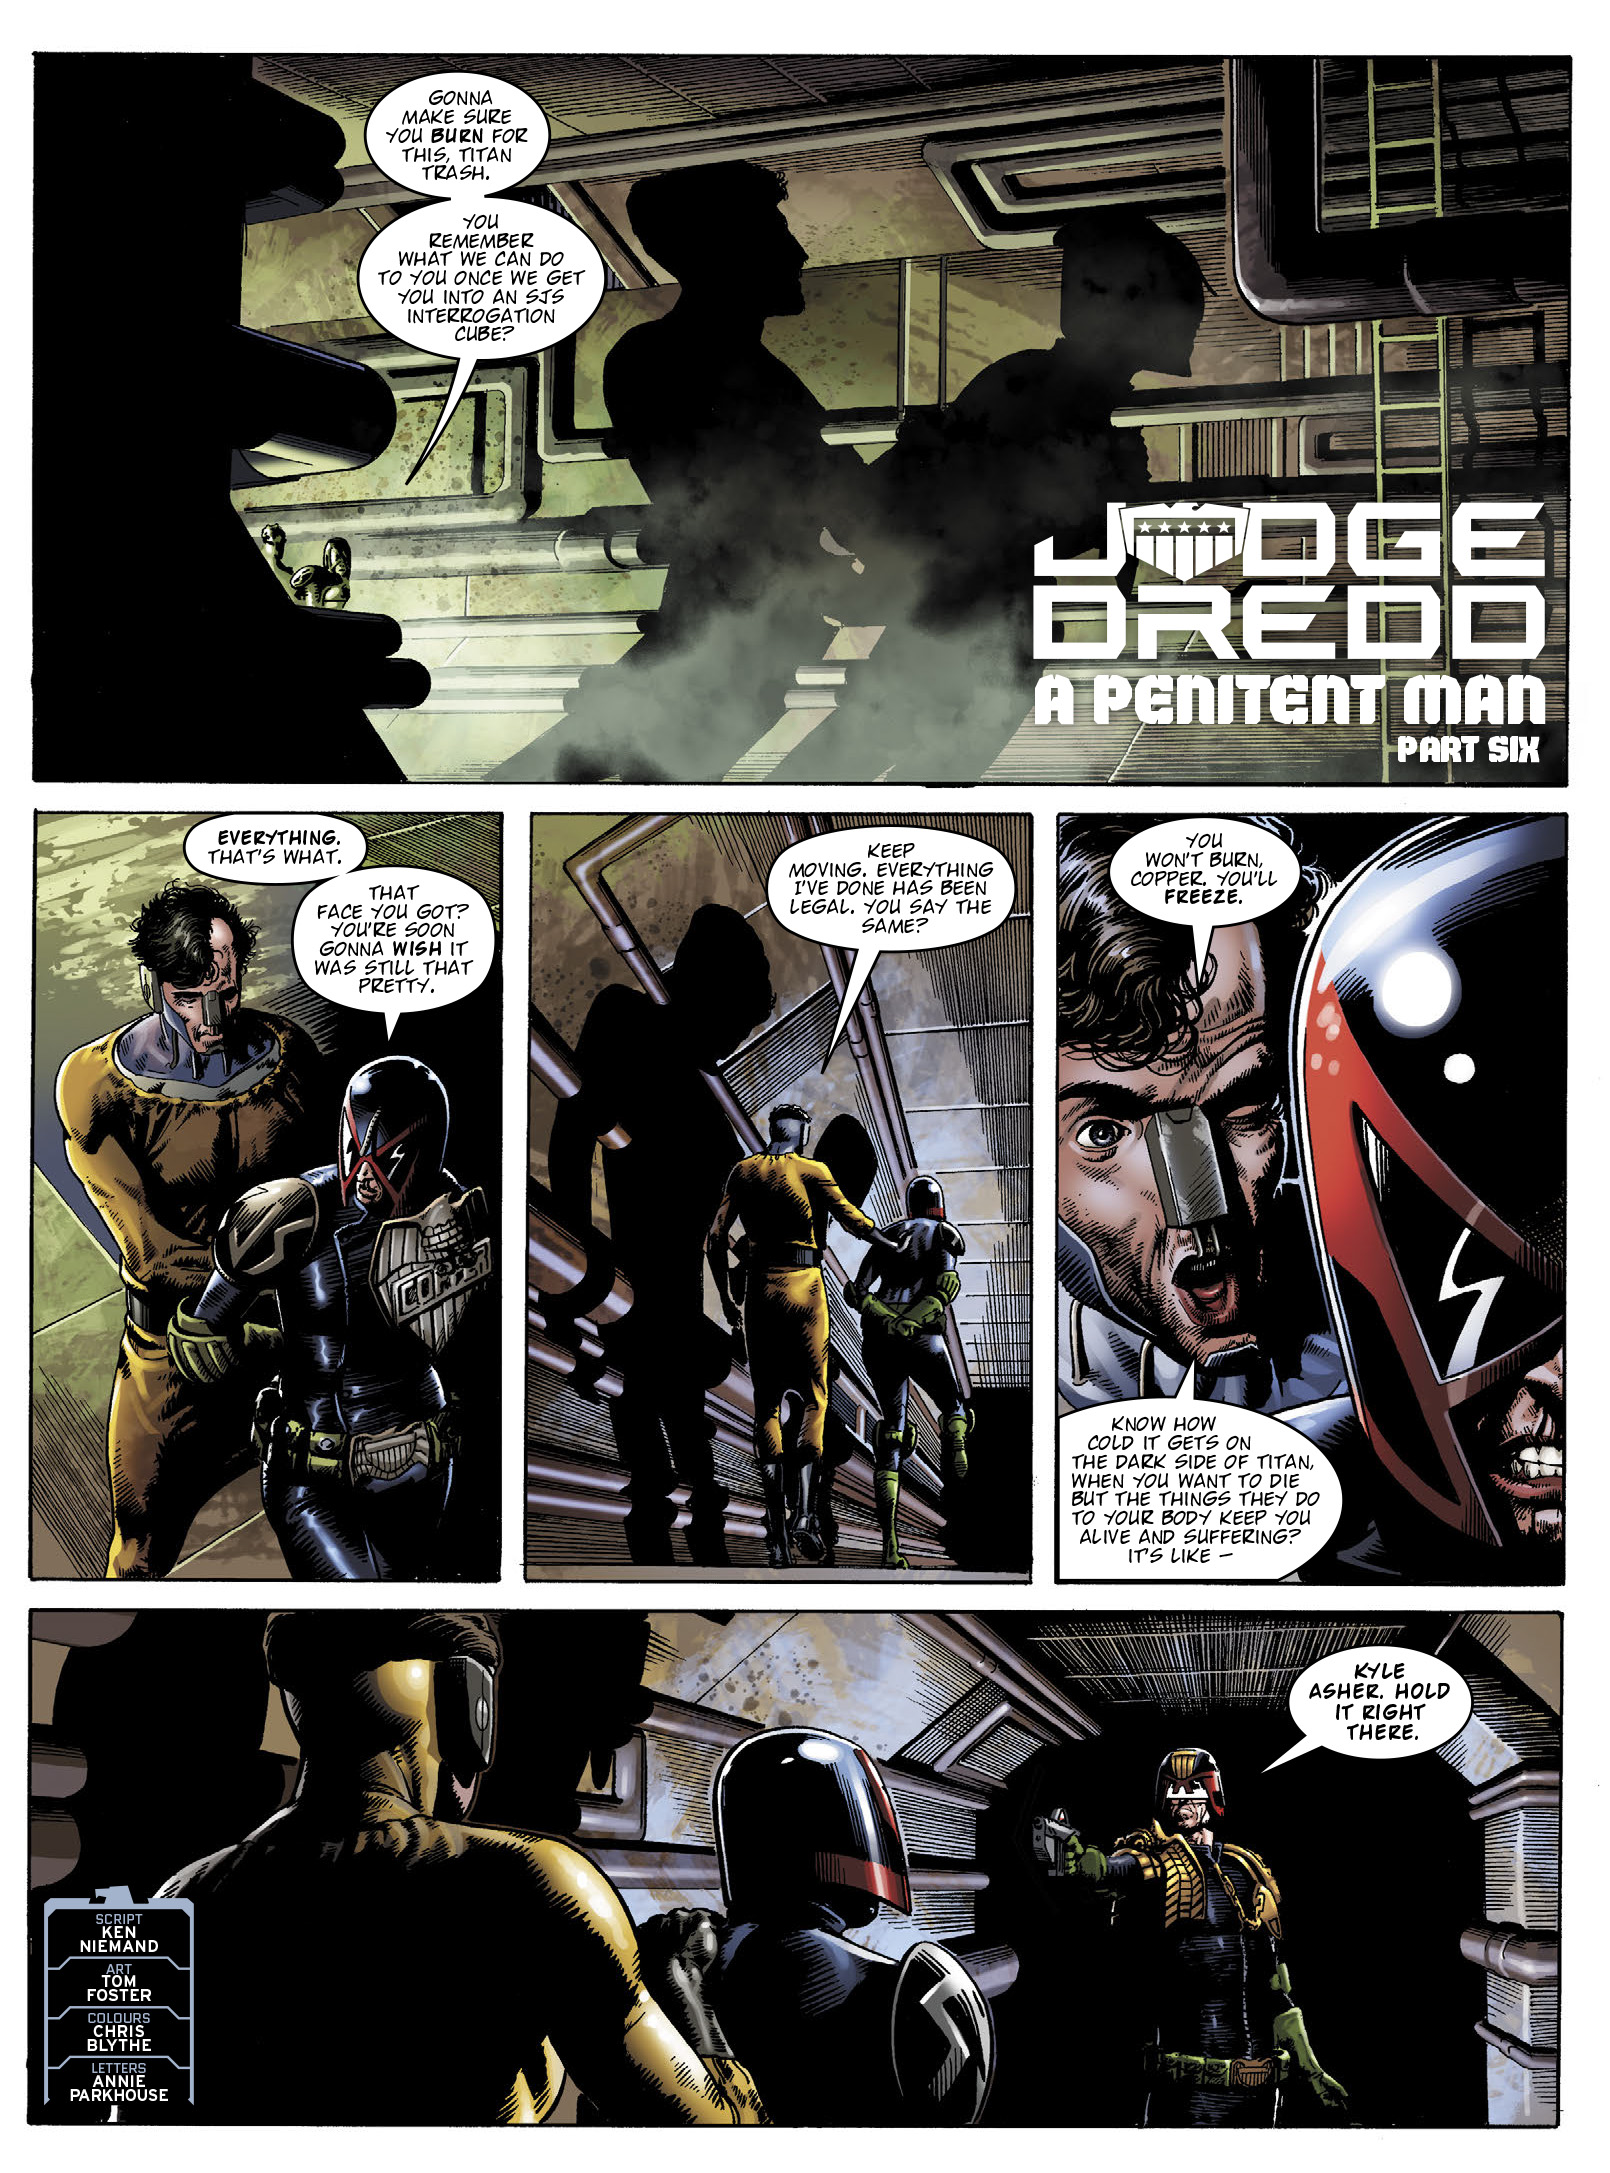 2000 AD: Chapter 2230 - Page 3